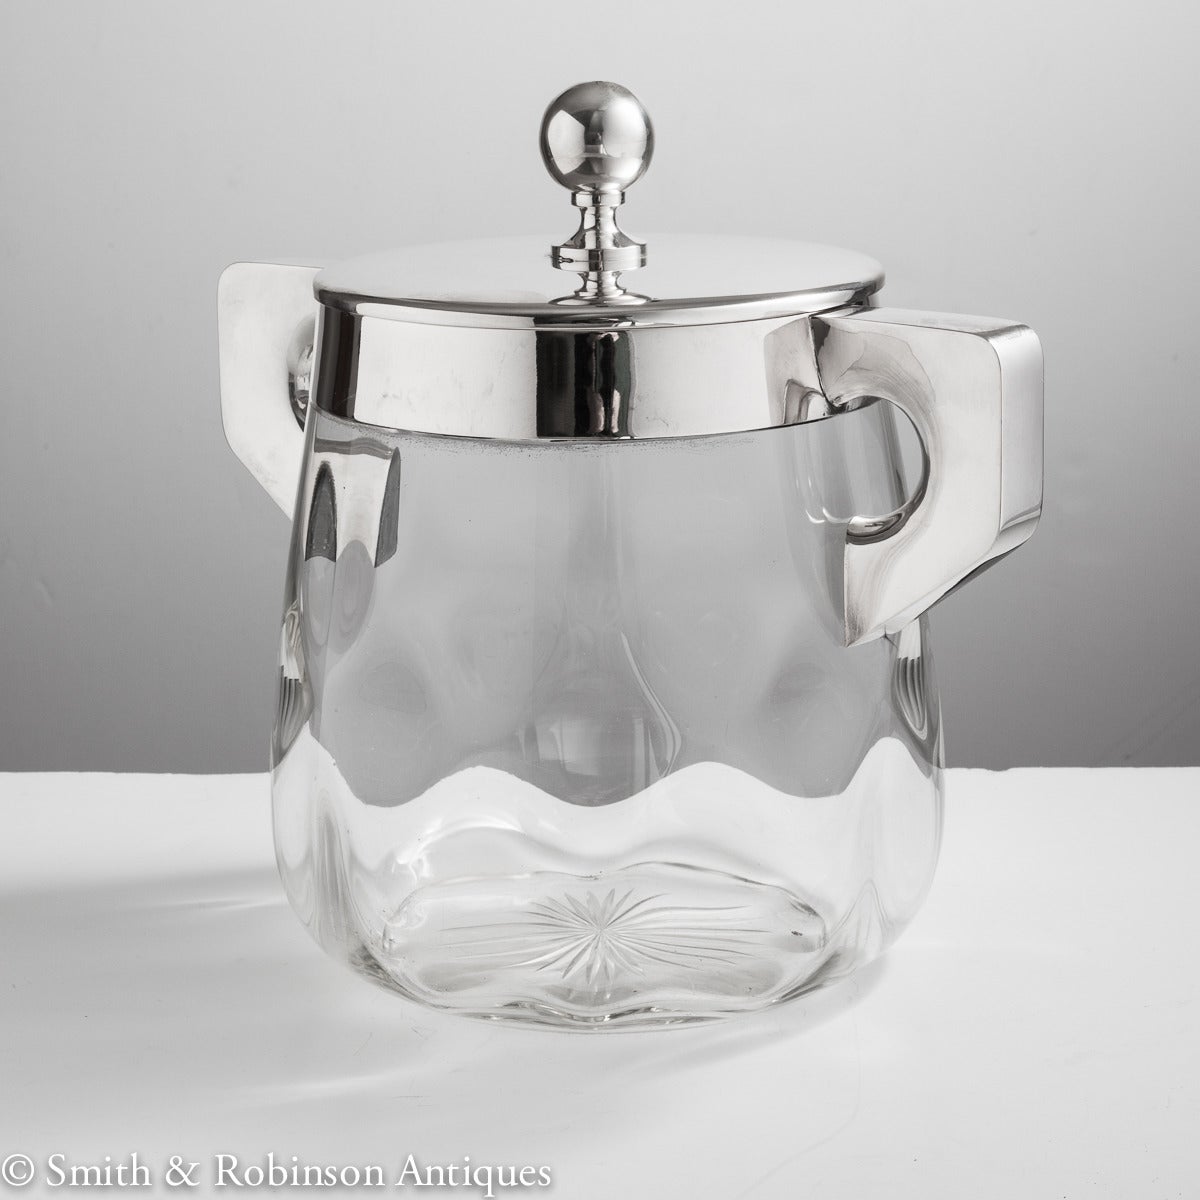 A large and very impressive glass and silver container with handles and cover by maker Meyen & Co, Berlin with silver mark 800, circa 1930.

We are always adding to our 1stdibs catalogue so be sure to add us to your favourite dealers and visit our